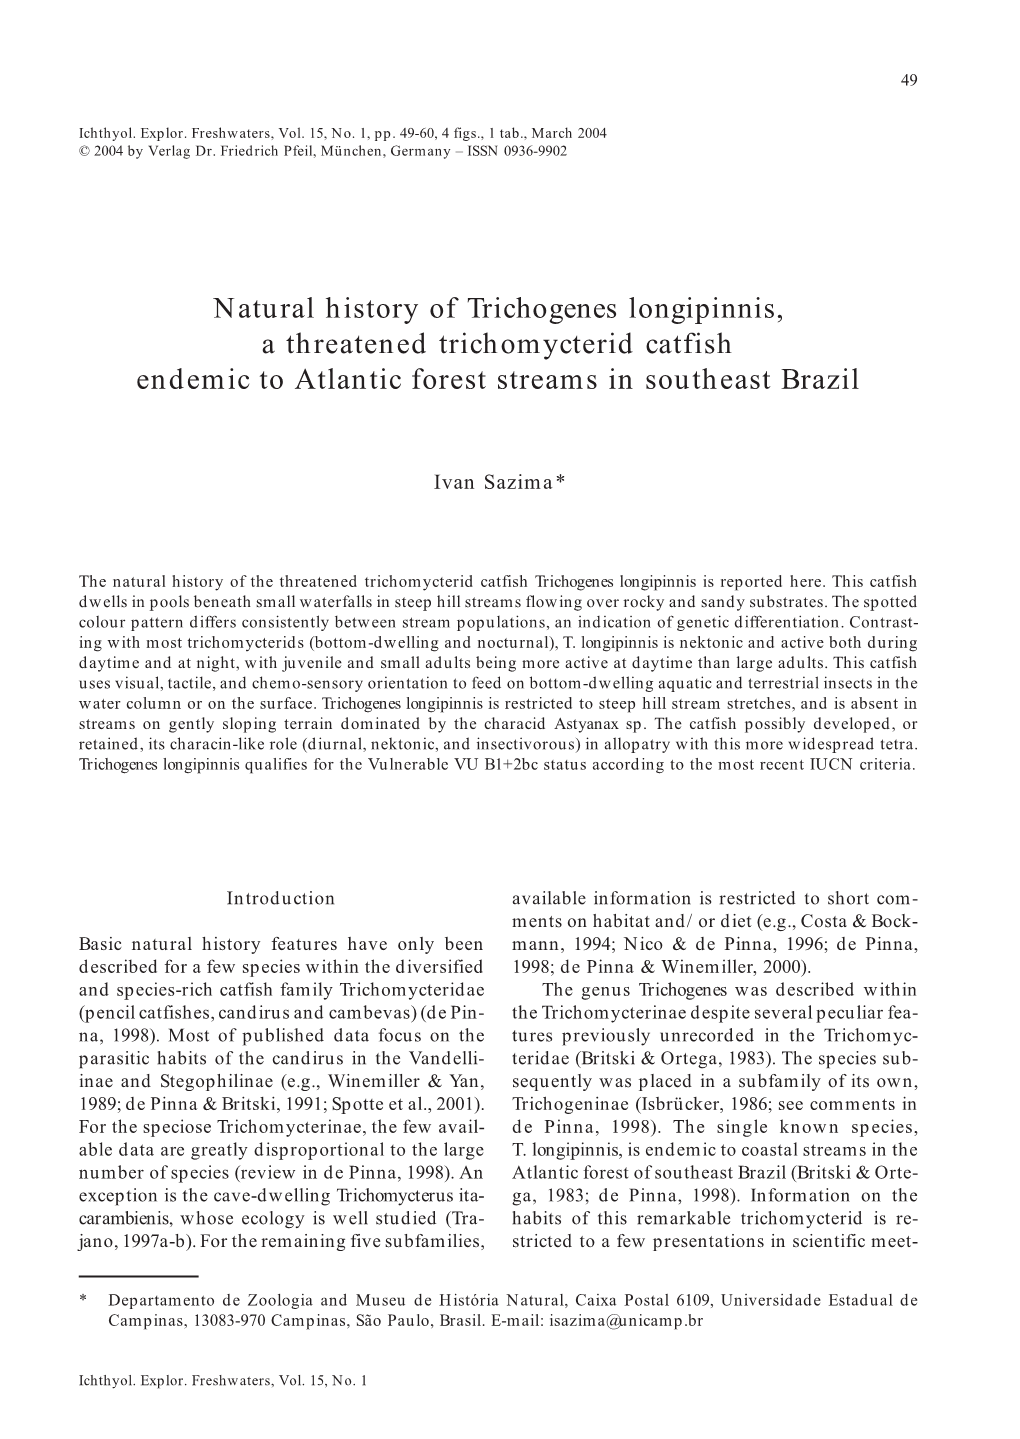 Natural History of Trichogenes Longipinnis, a Threatened Trichomycterid Catfish Endemic to Atlantic Forest Streams in Southeast Brazil